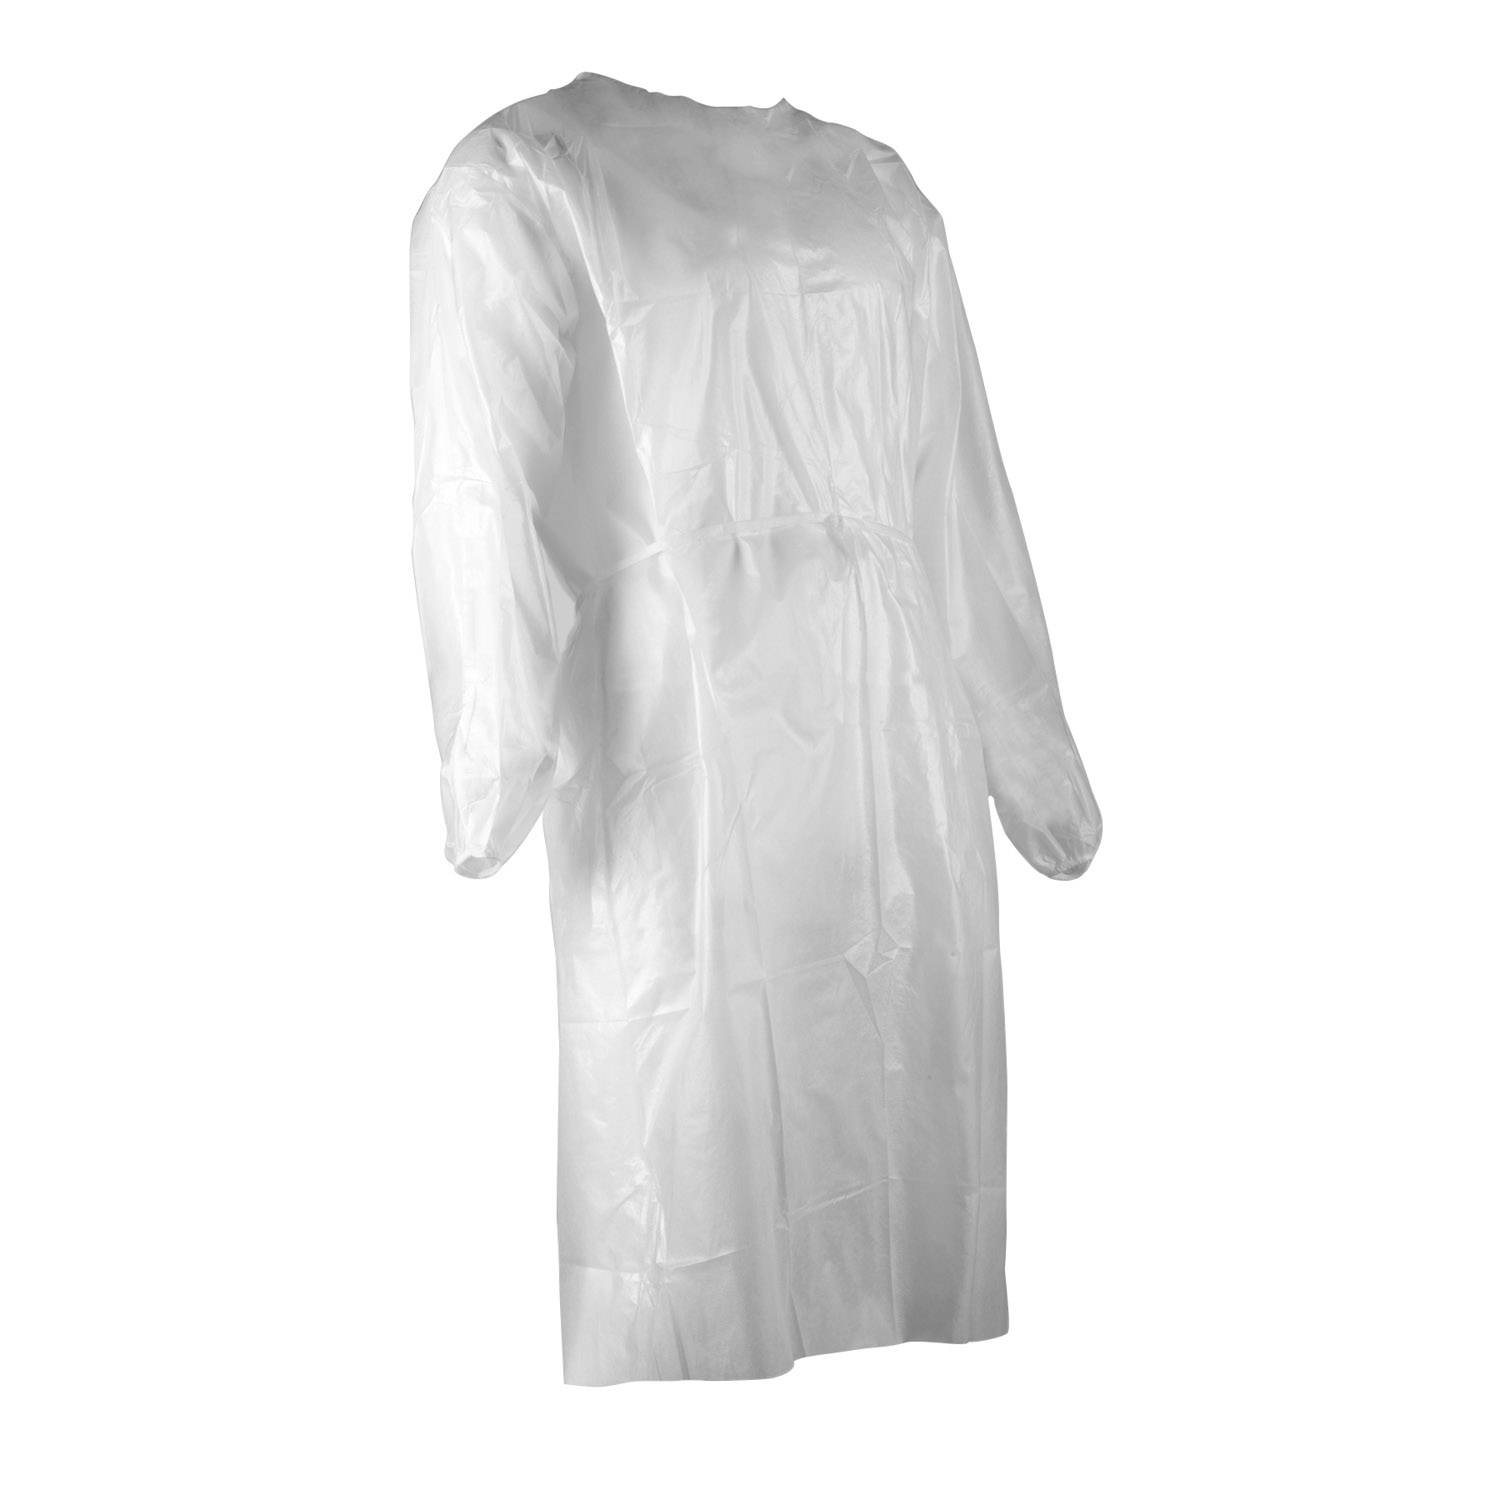 Galls Level 2 Isolation Gown (Non-Sterile)